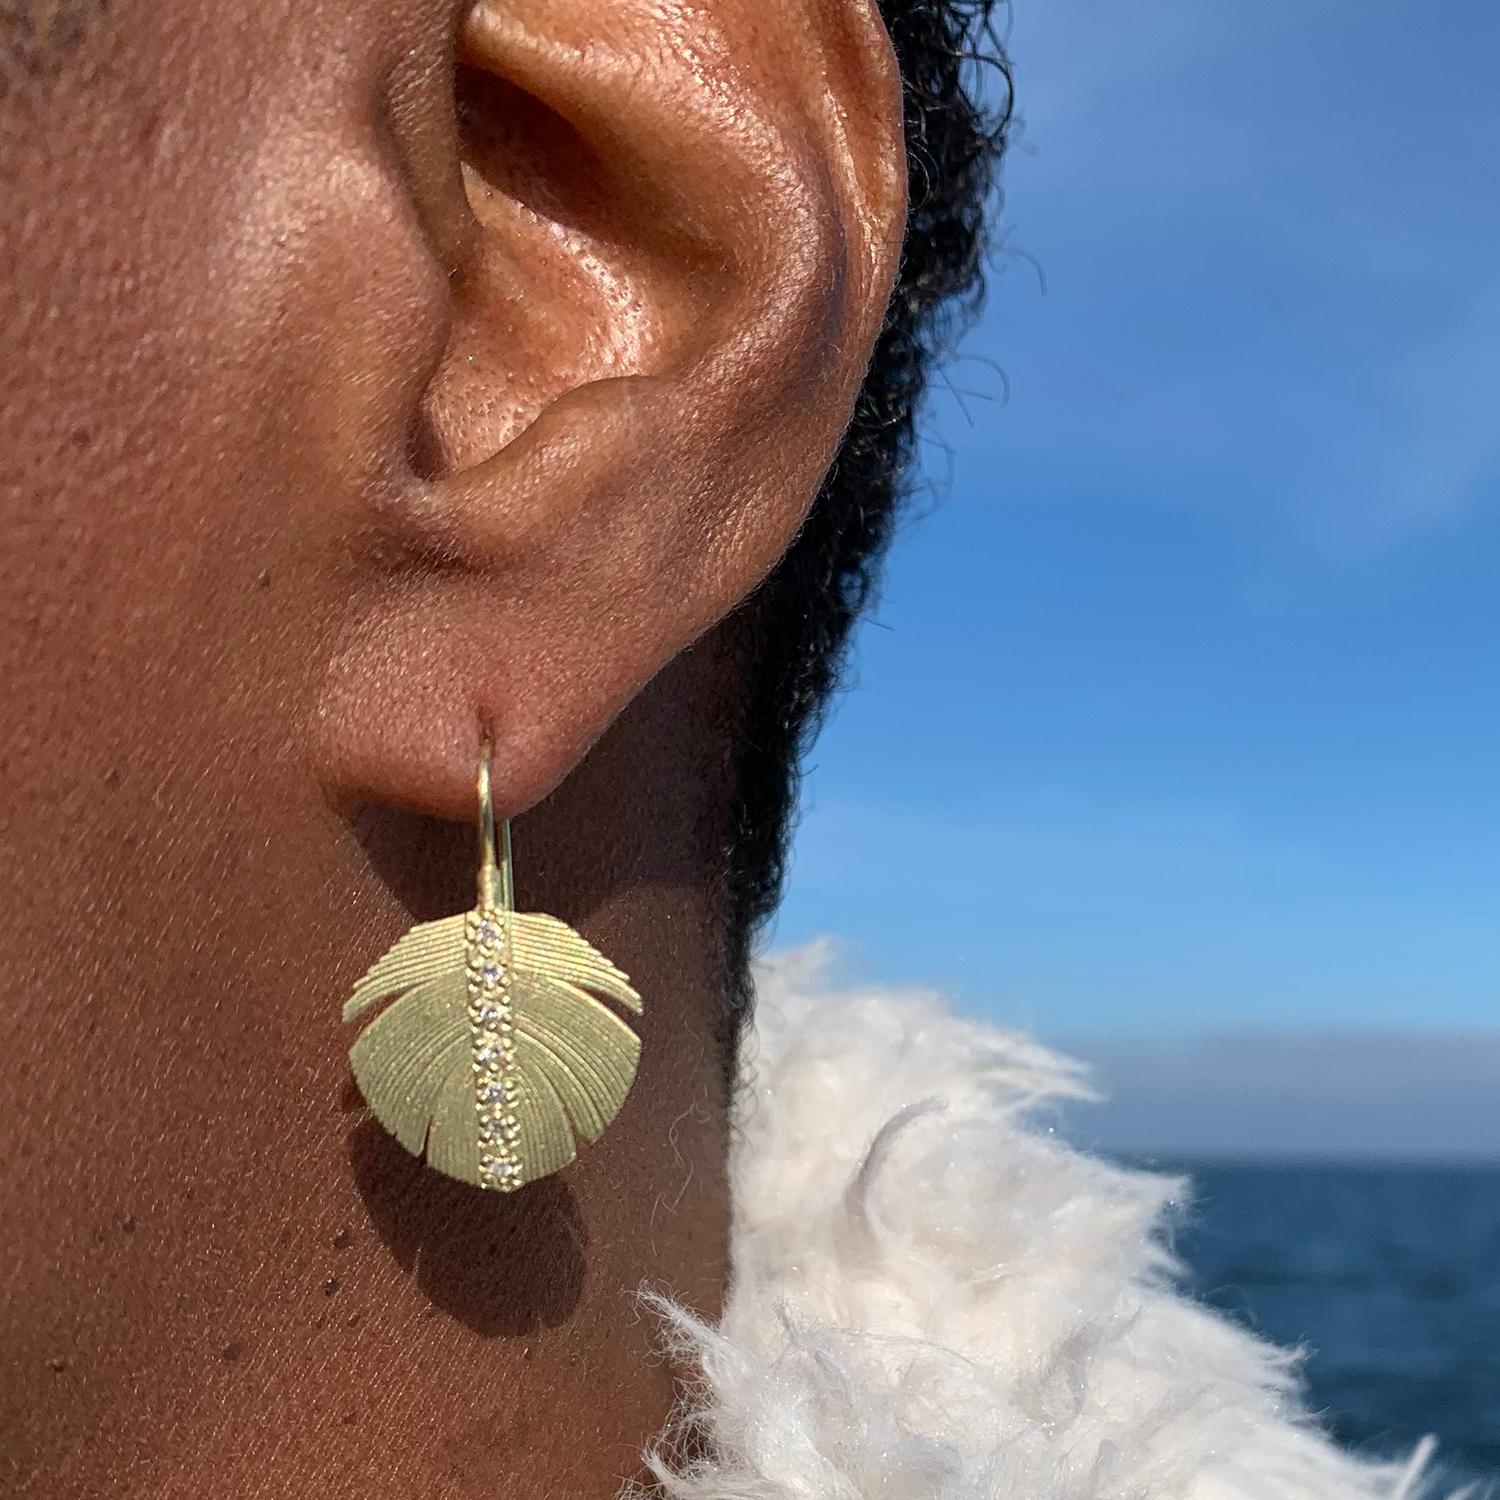 These lovely earrings are perfect for any nature lover, bird watcher, or boho babe!
18k yellow gold feathers with center channels of pave set diamonds hang delicately from 18k yellow gold ear wires. The earrings measure from ear 1